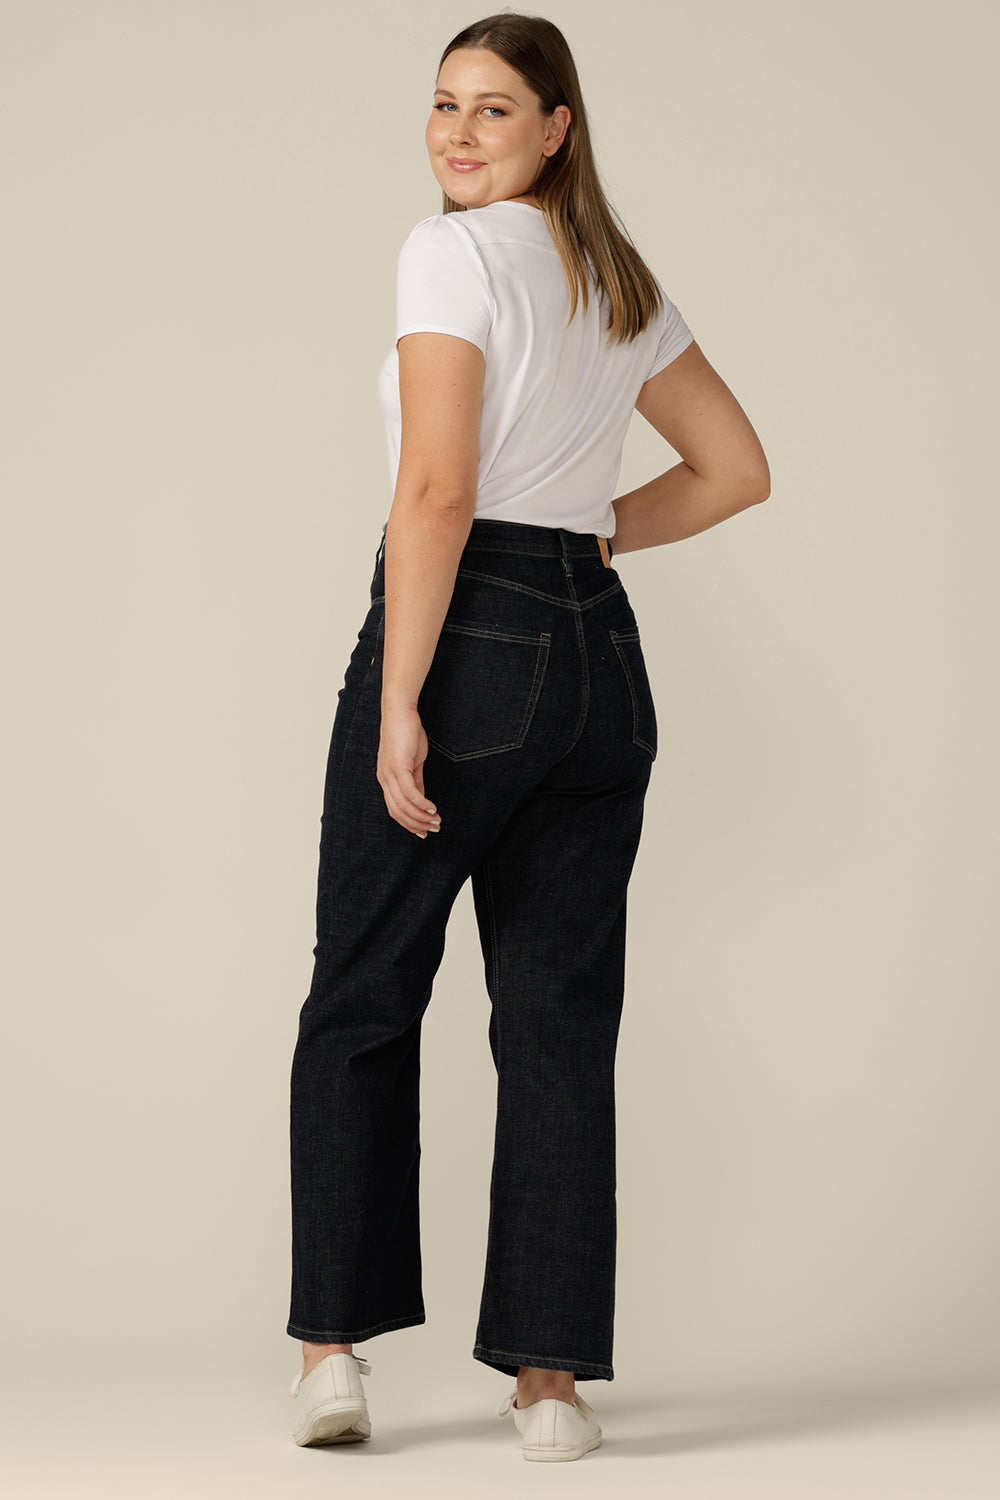 Well-fitting conscious jeans wear by Australian and New Zealand women's clothing brand, L&F, these are high-waisted, flared leg jeans in midnight denim, worn with a white bamboo jersey top.